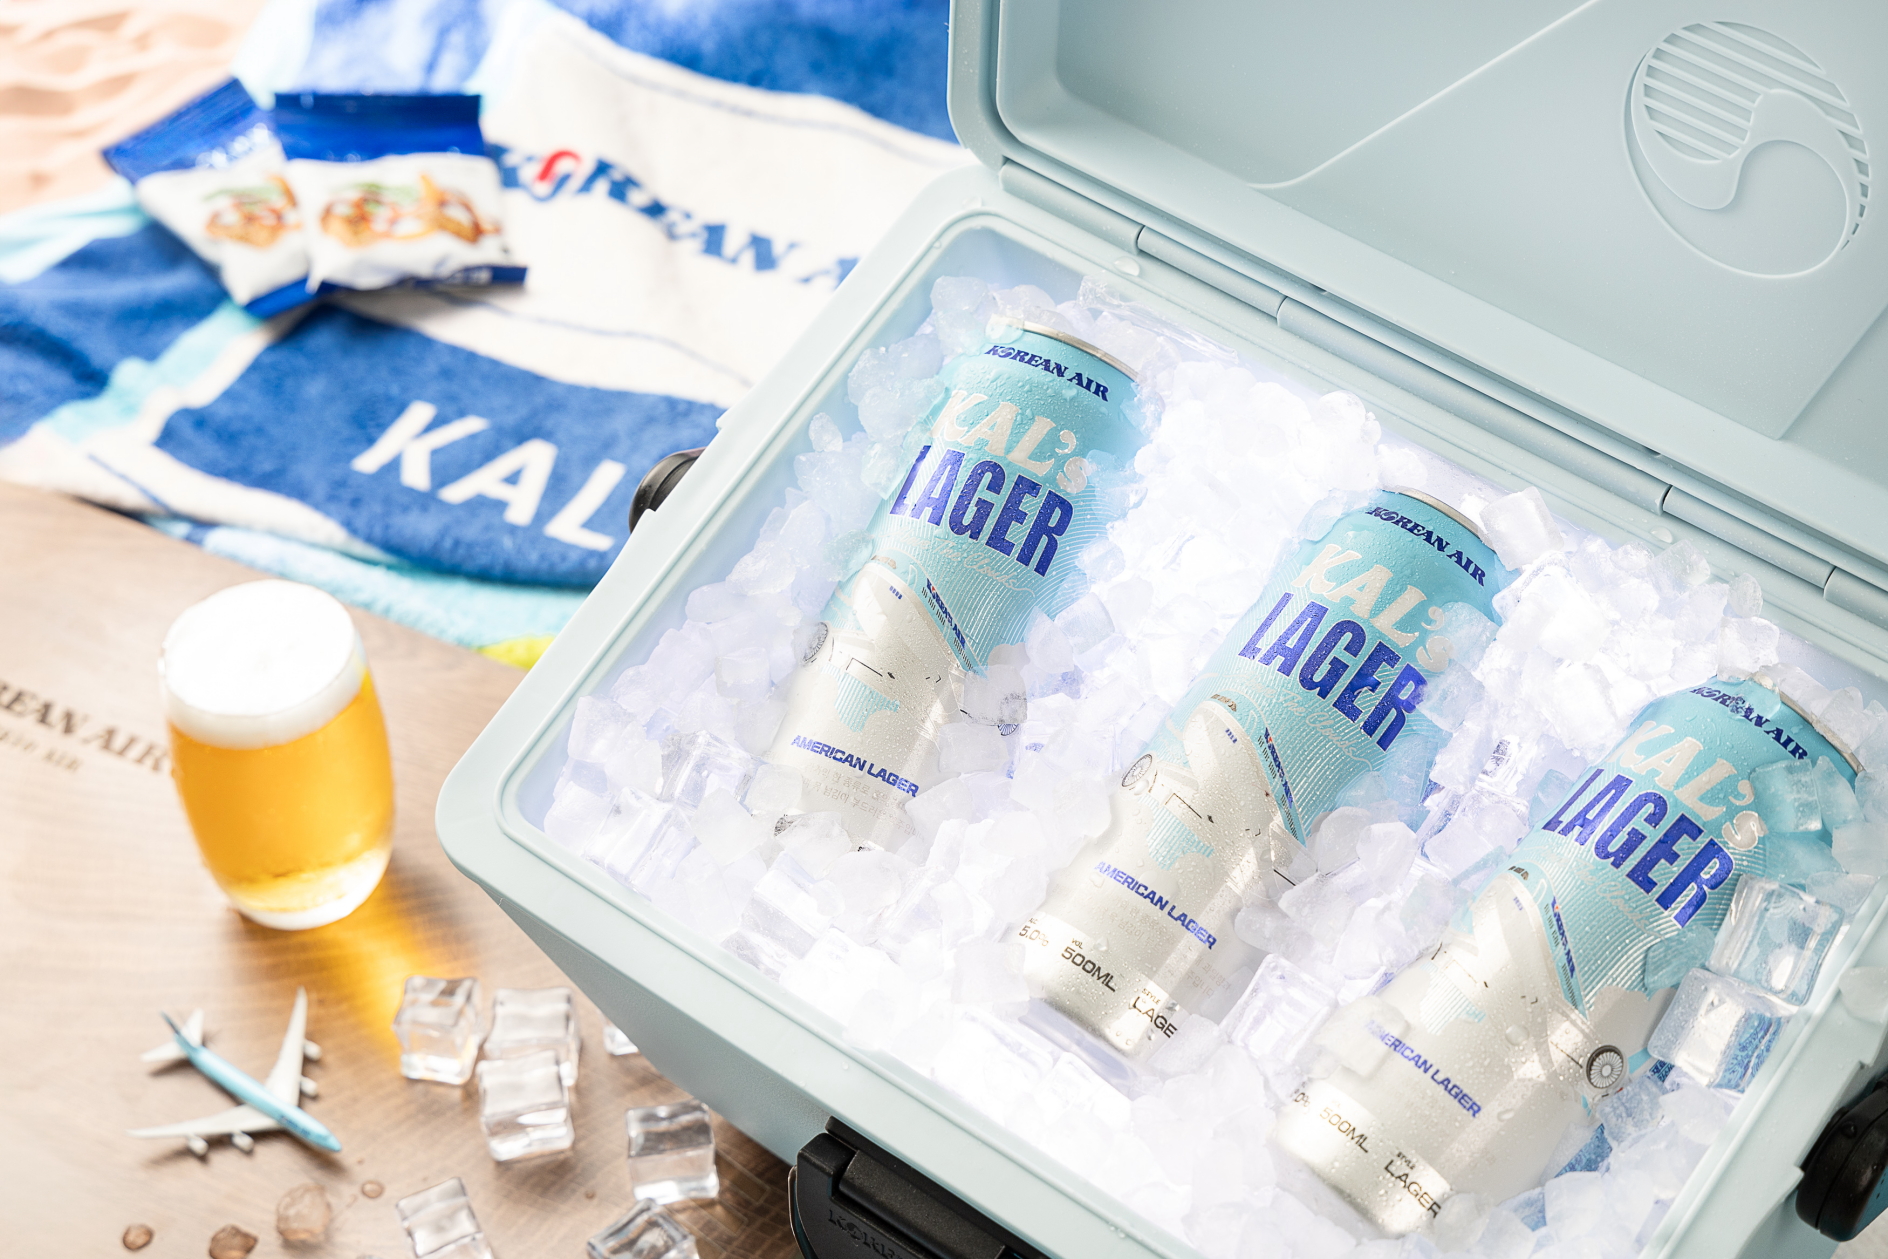 KAL's Lager will be available in Gimpo and Incheon lounges from 27 July and onboard flights from September. Click to enlarge.